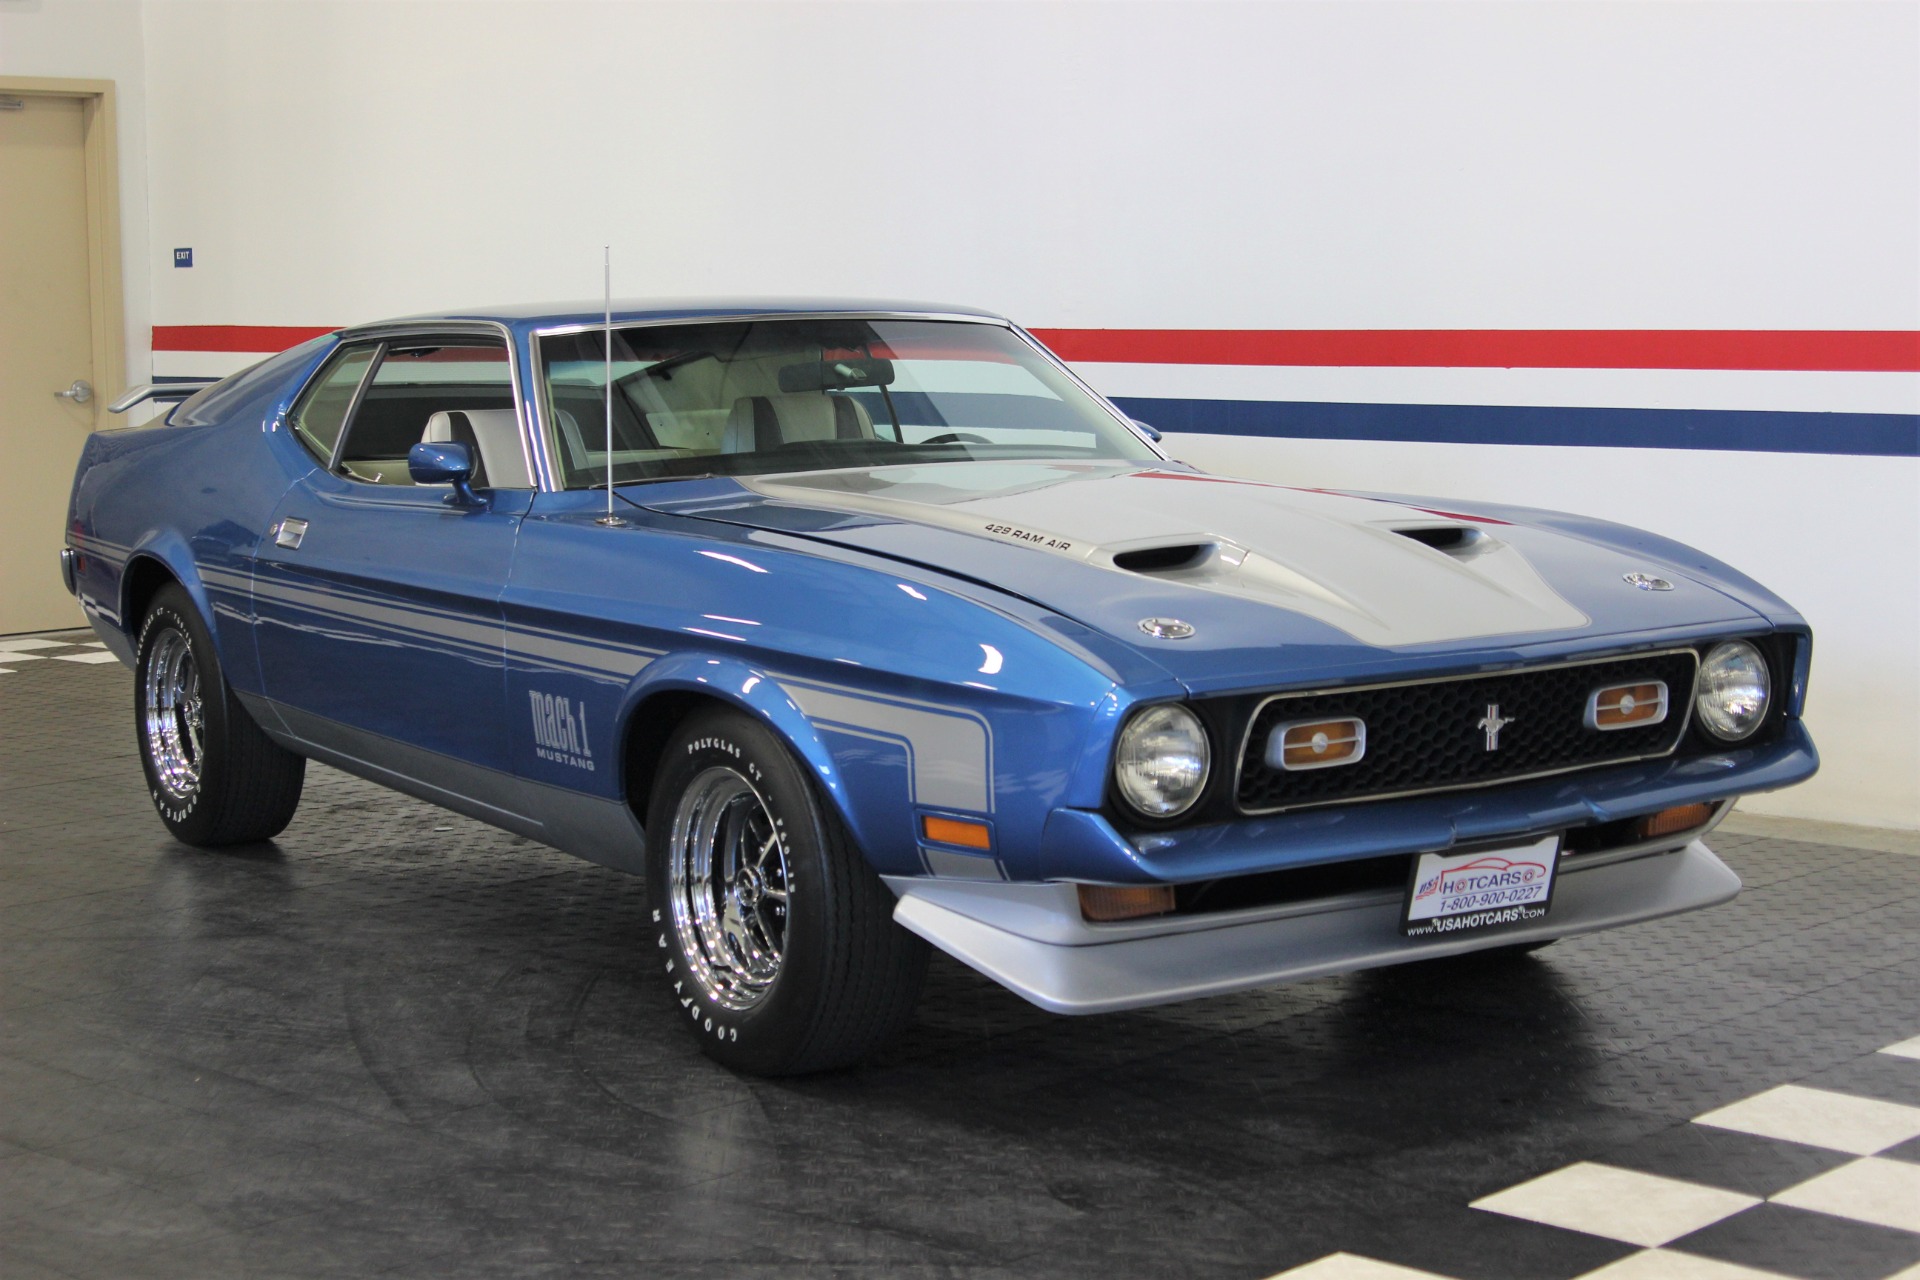 Used-1971-Ford-Mustang-Mach-1-429-SCJ.